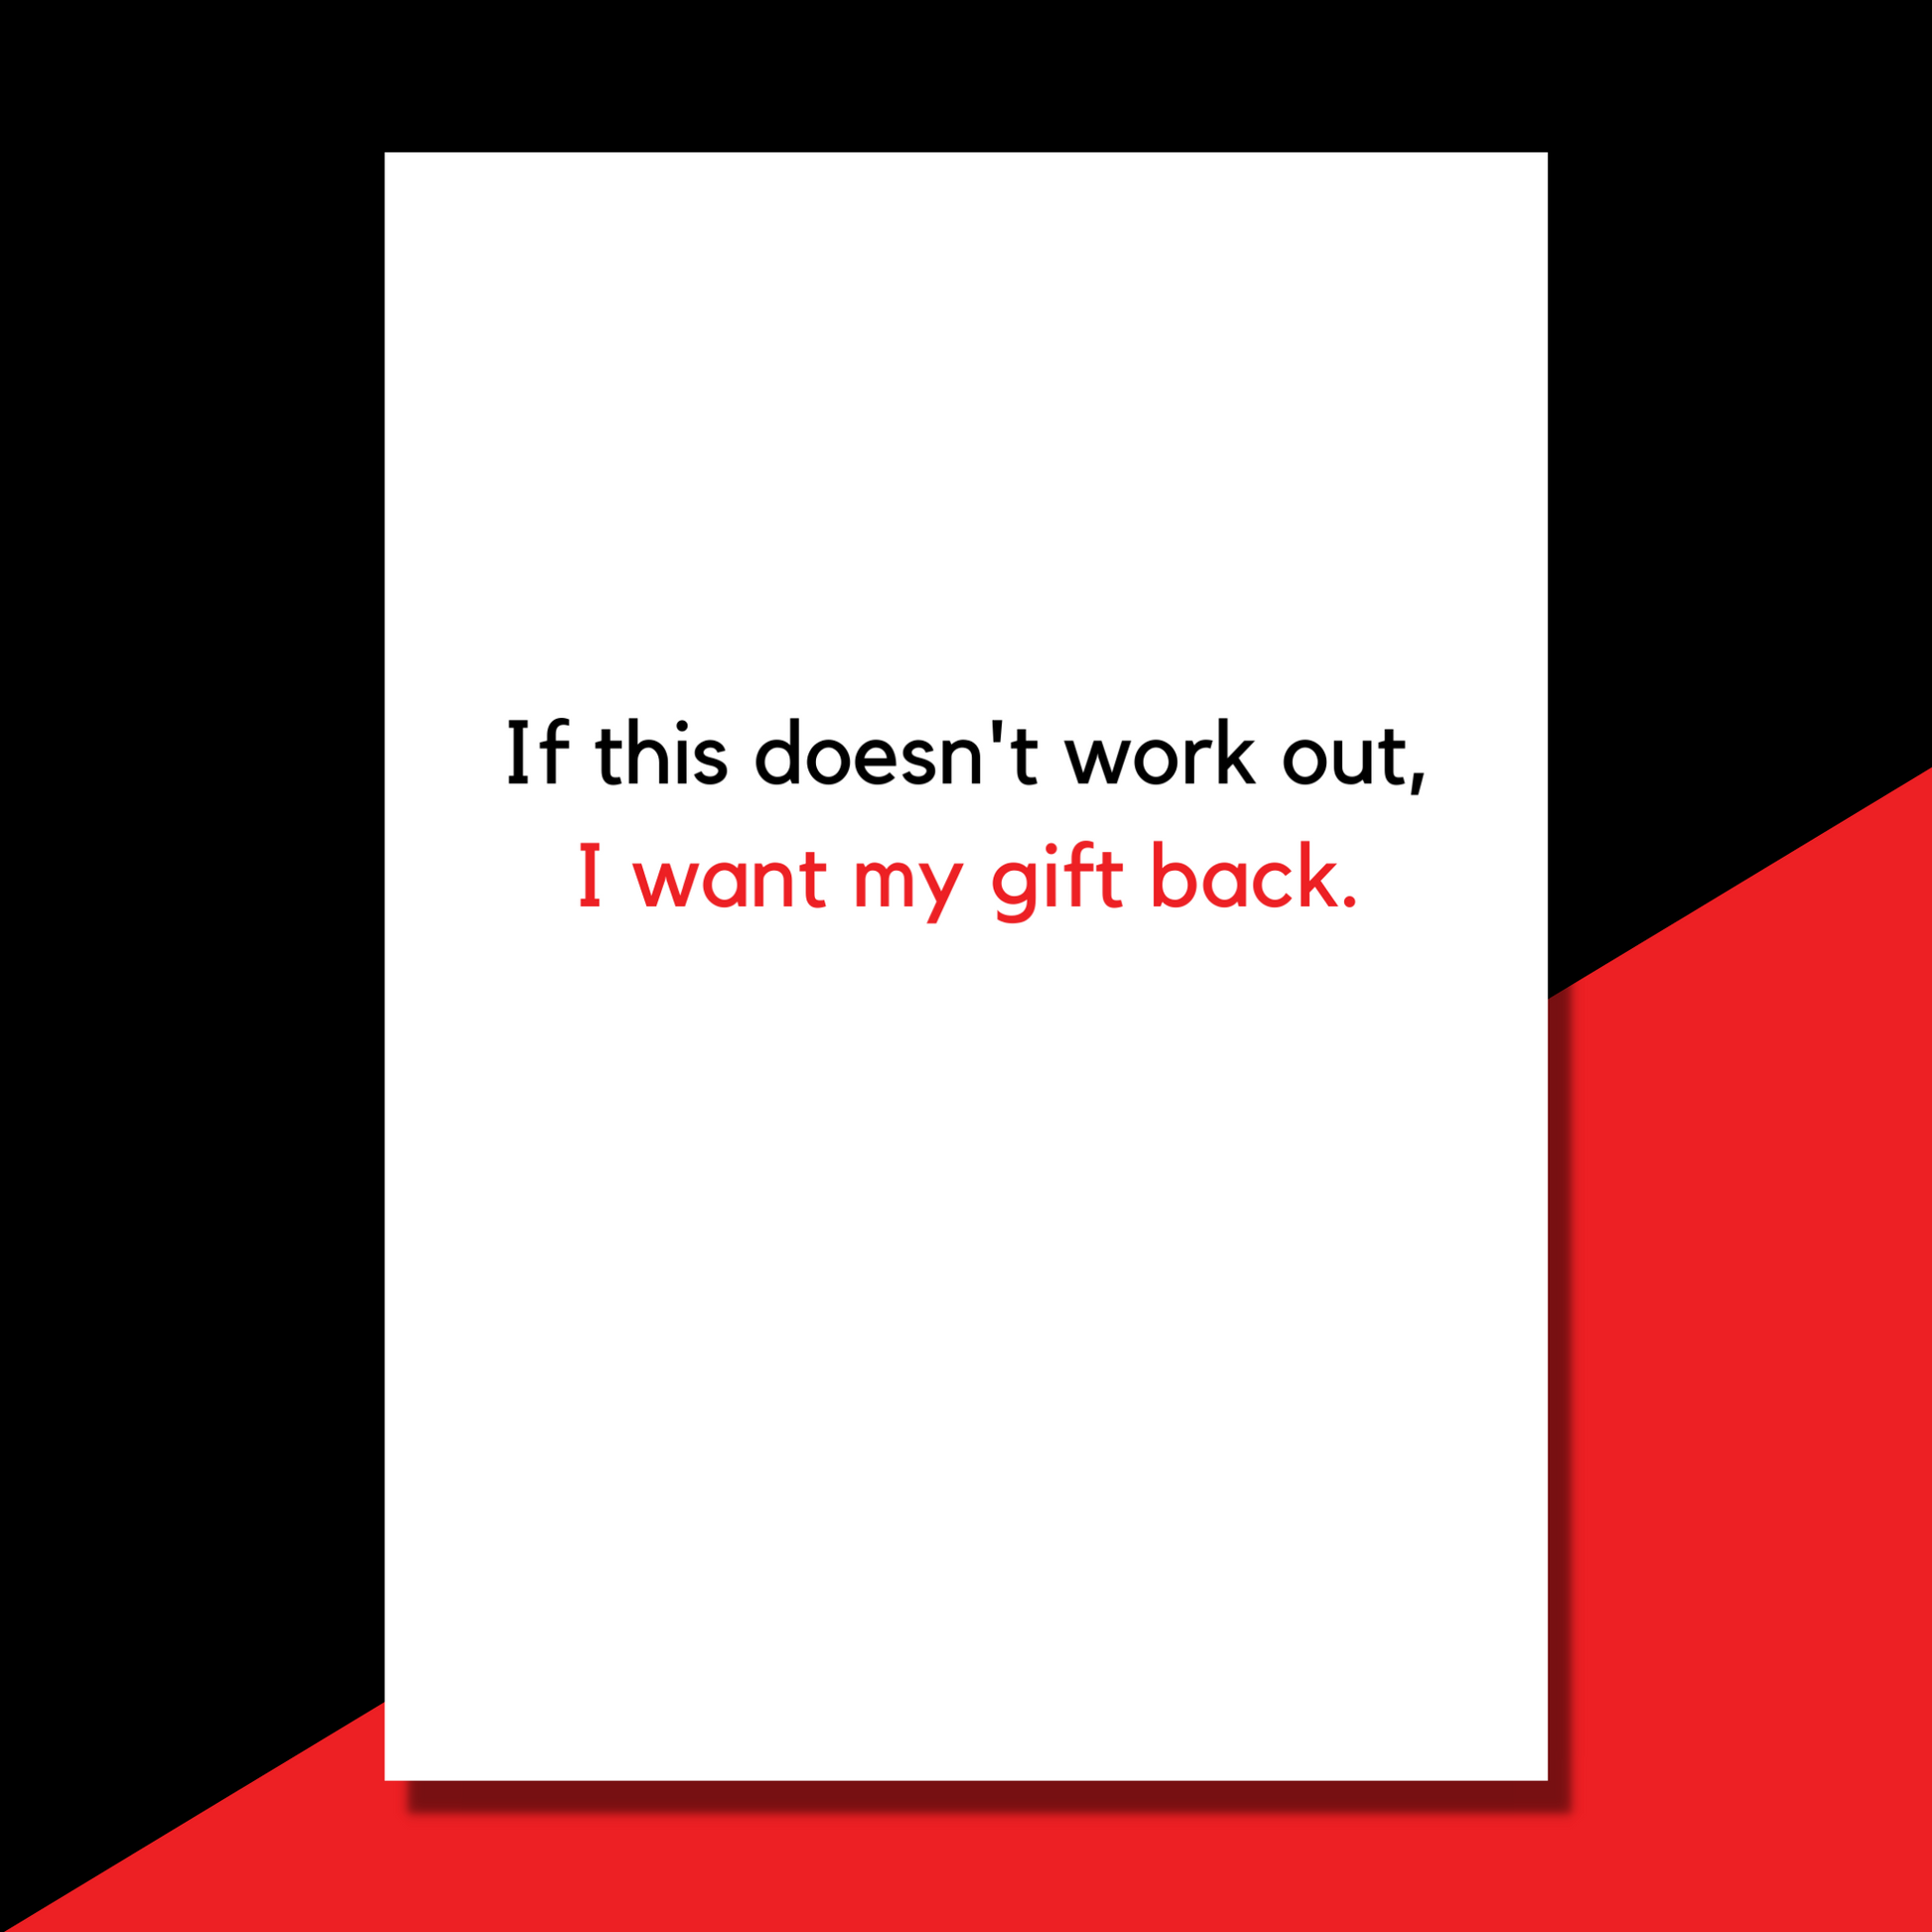 A bitchy wedding or engagement card that says "If this doesn't work out, I want my gift back" - perfect for weddings and engagements!